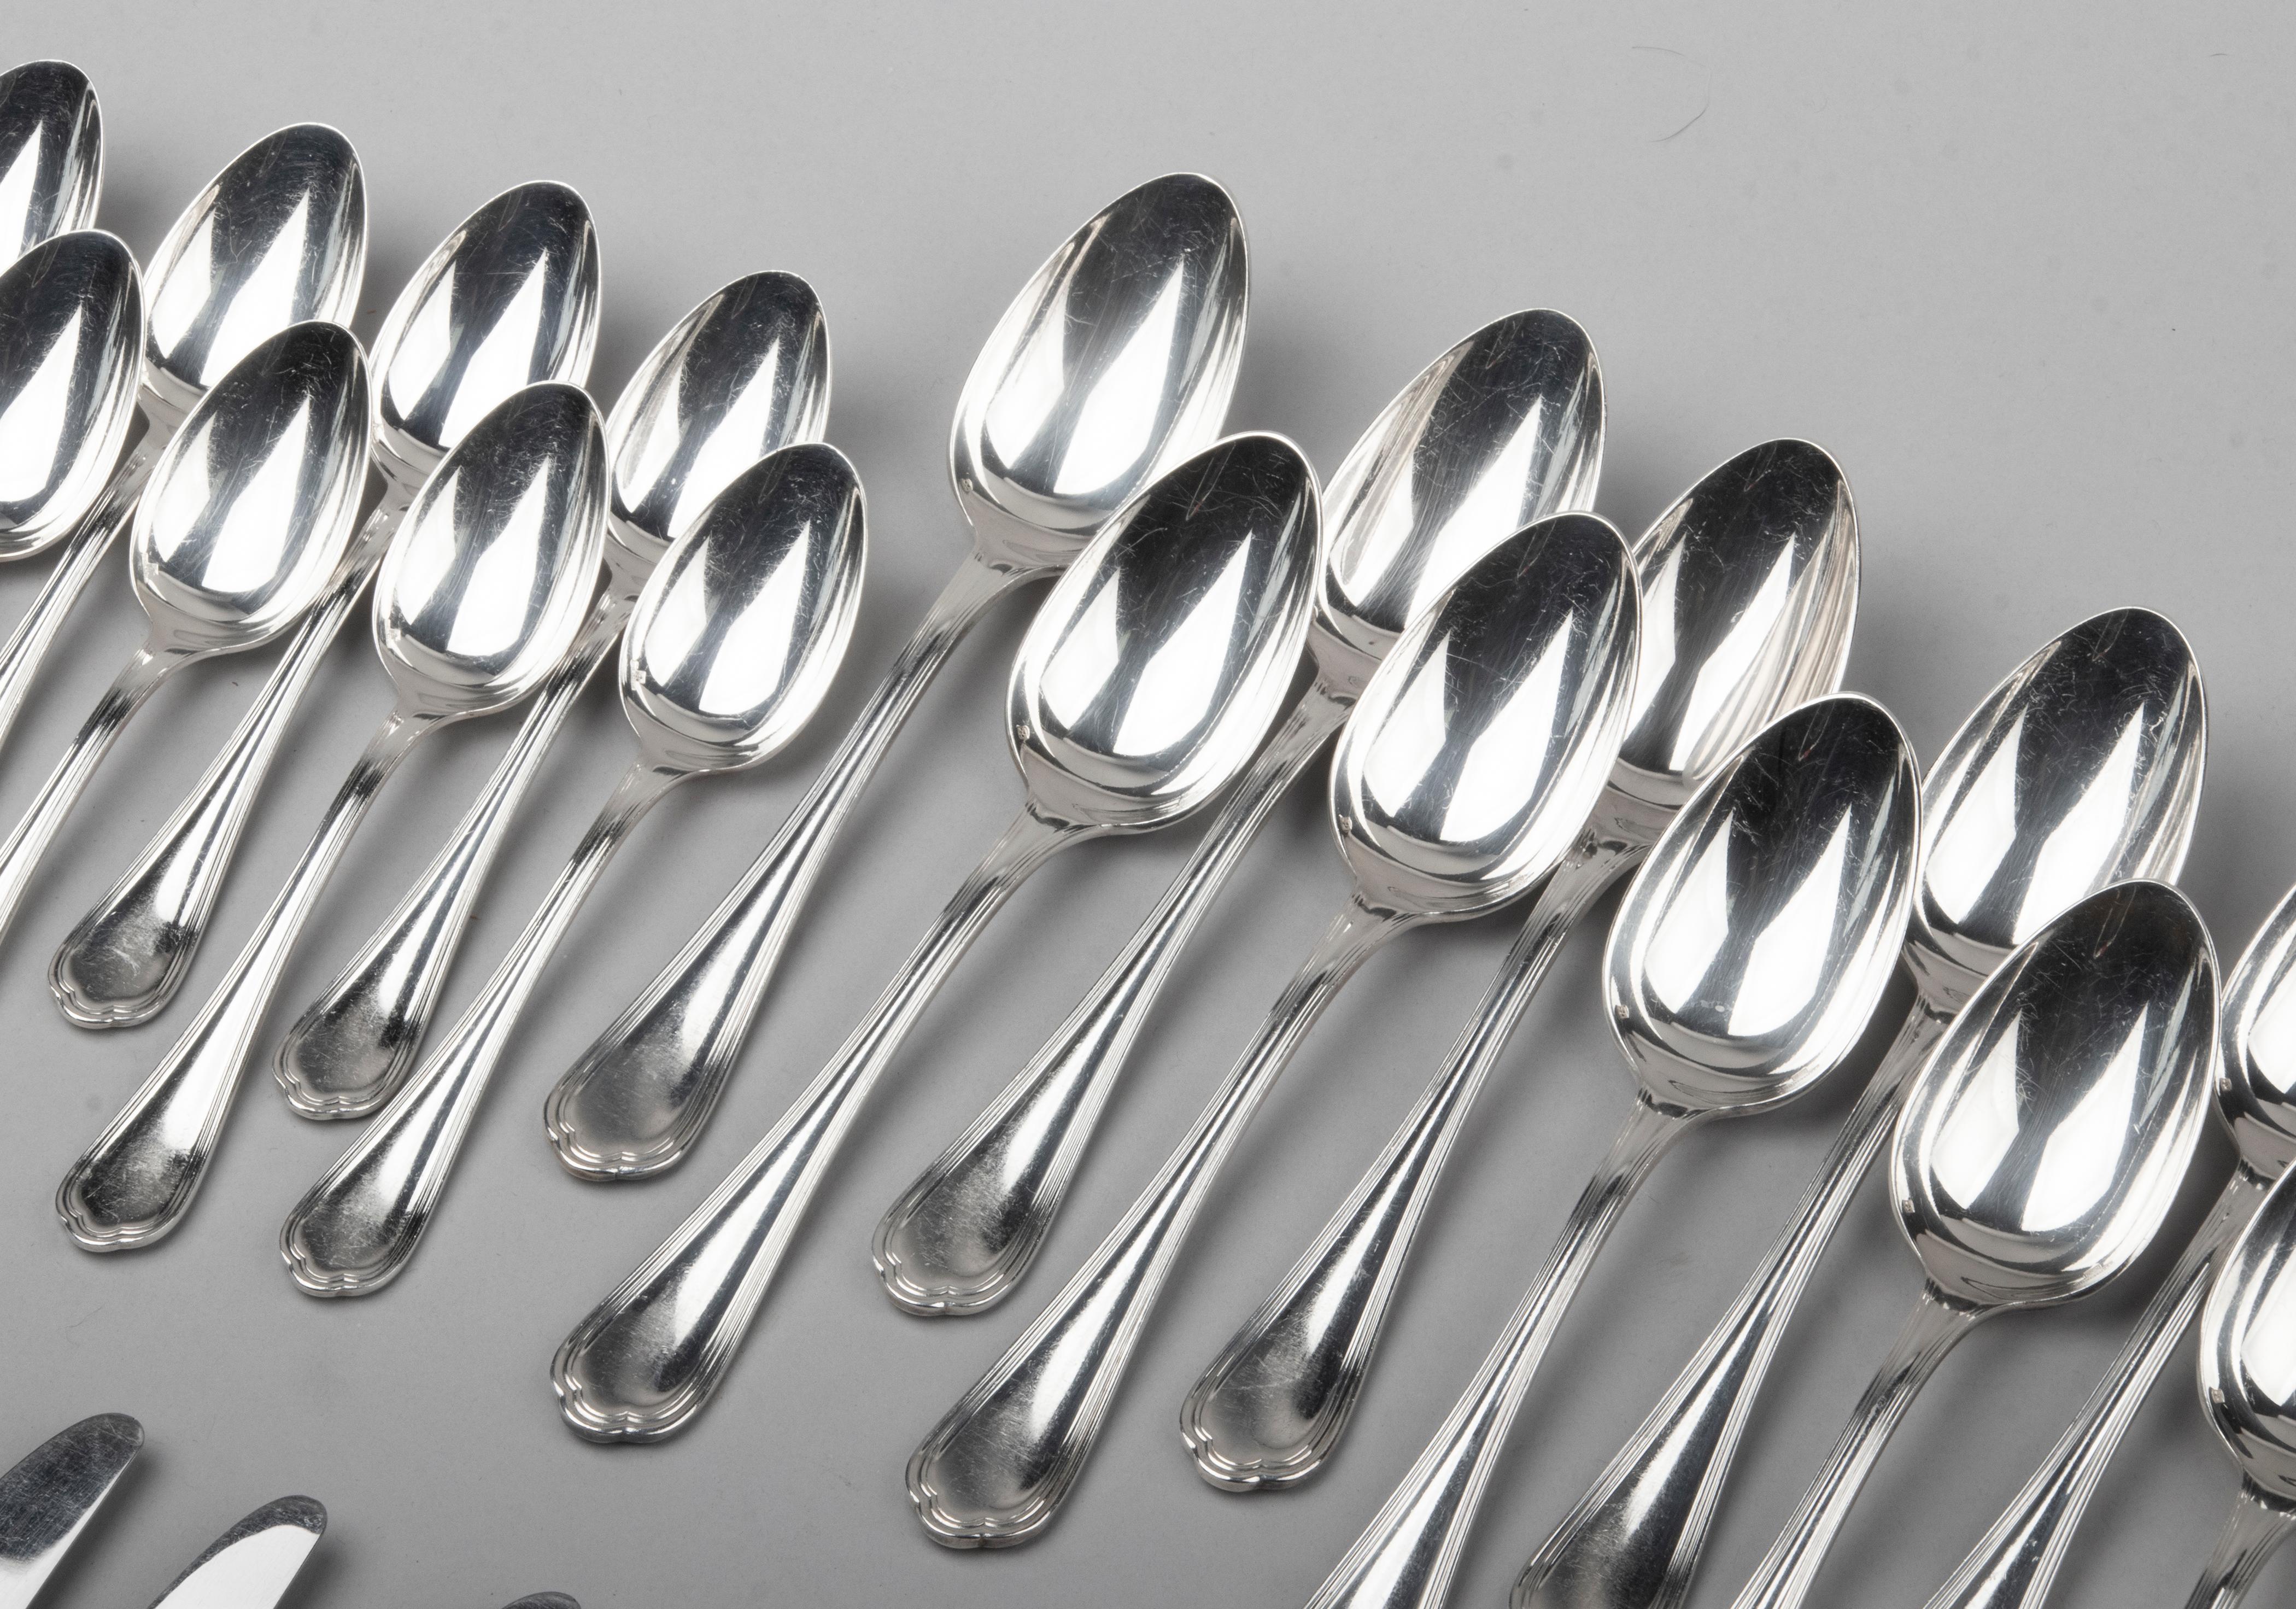 96-Piece Set of Silver Plated Flatware by Christofle Model Spatours 13